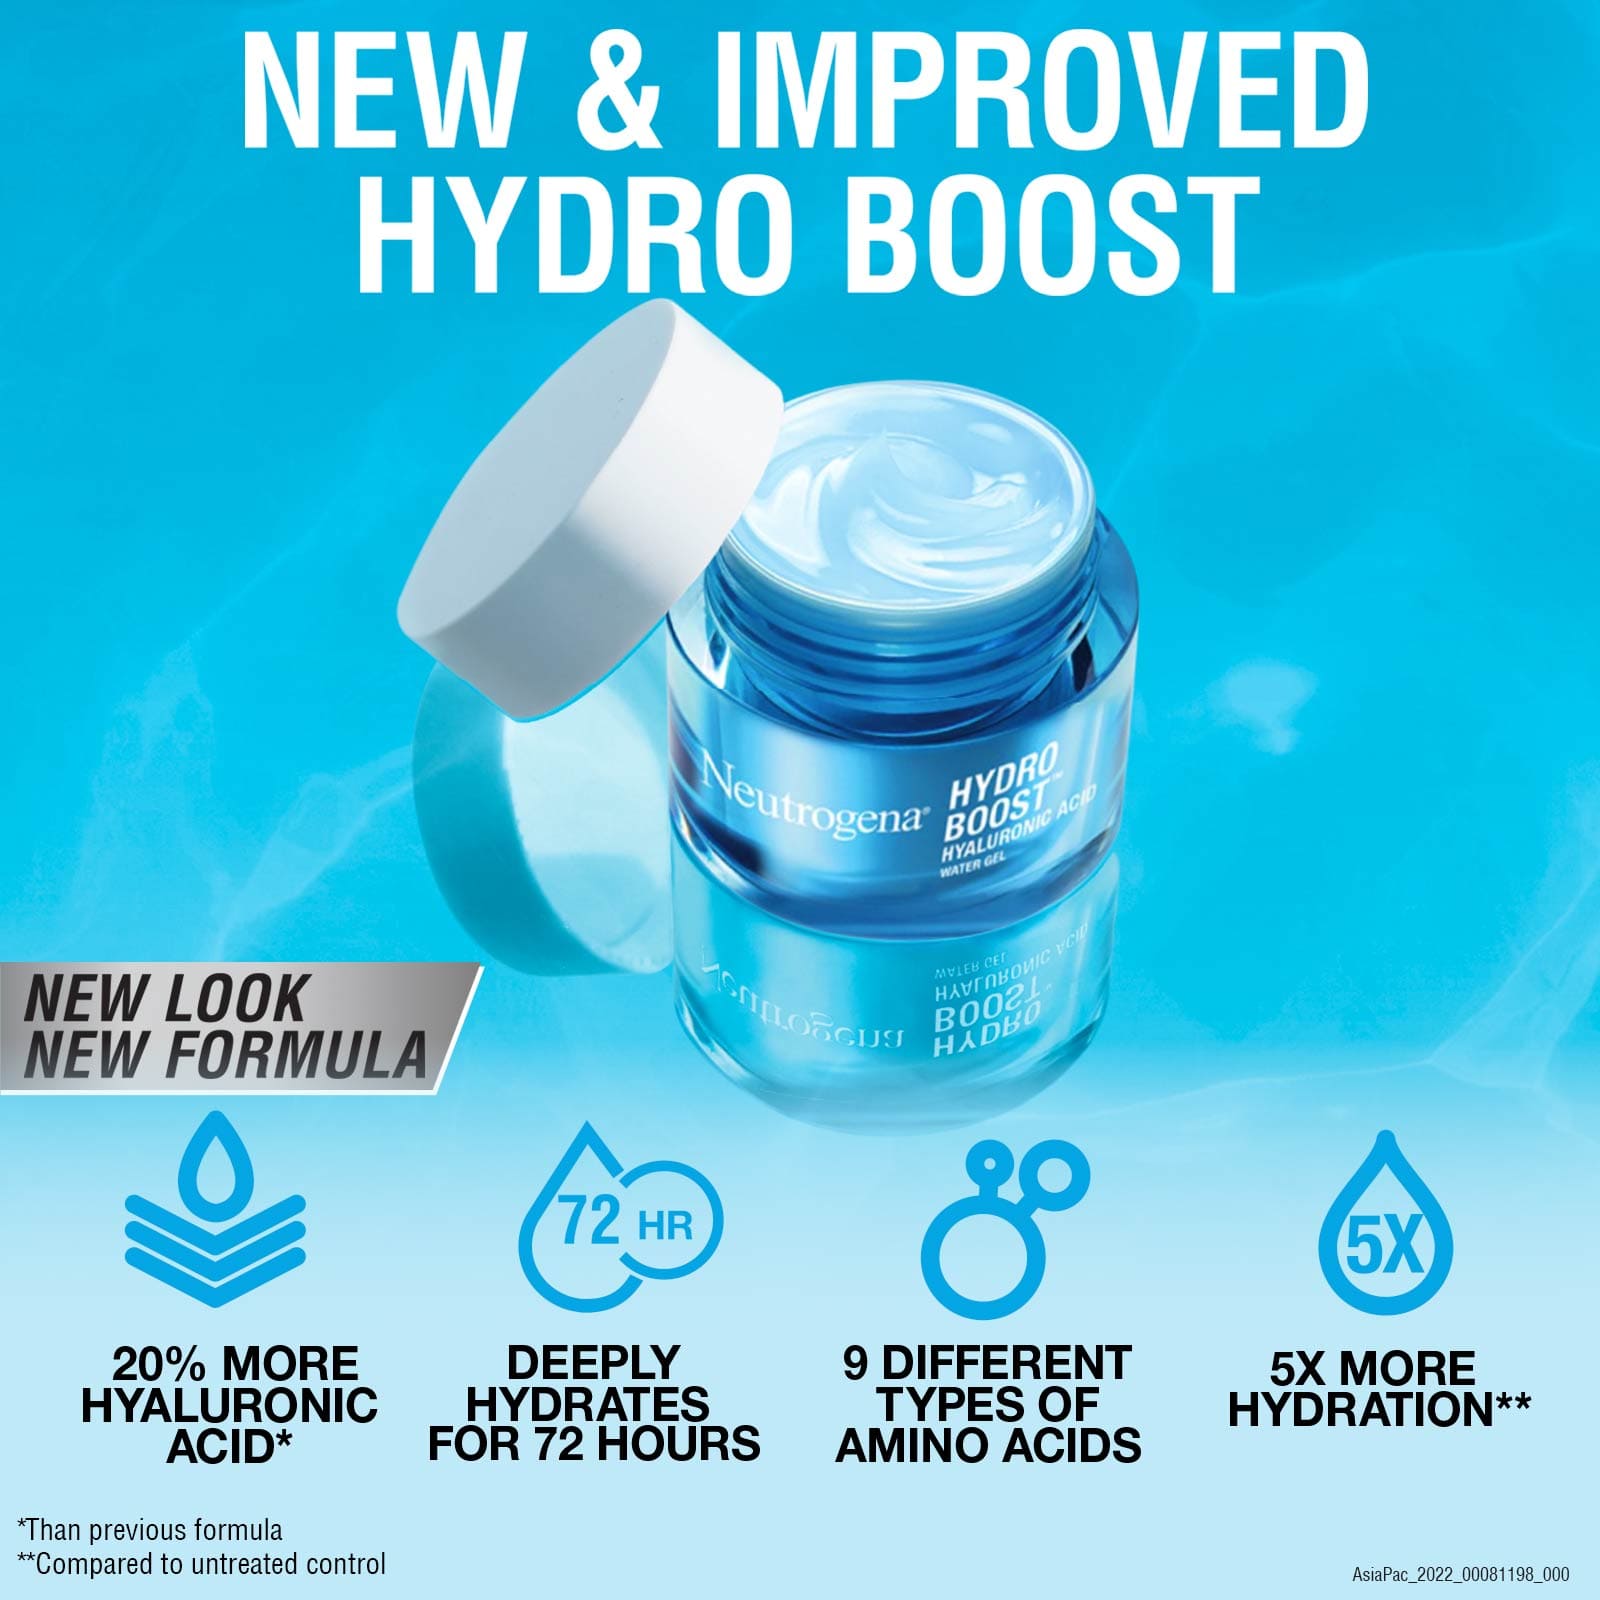 NEW & IMPROVED HYDRO BOOST 20% MORE HYALURONIC ACID* DEEPLY HYDRATES FOR 72 HOURS 9 DIFFERENT TYPES OF AMINO ACIDS 5X MORE HYDRATION INGREDIENTS**  *Than previous formula**As compared to untreated control